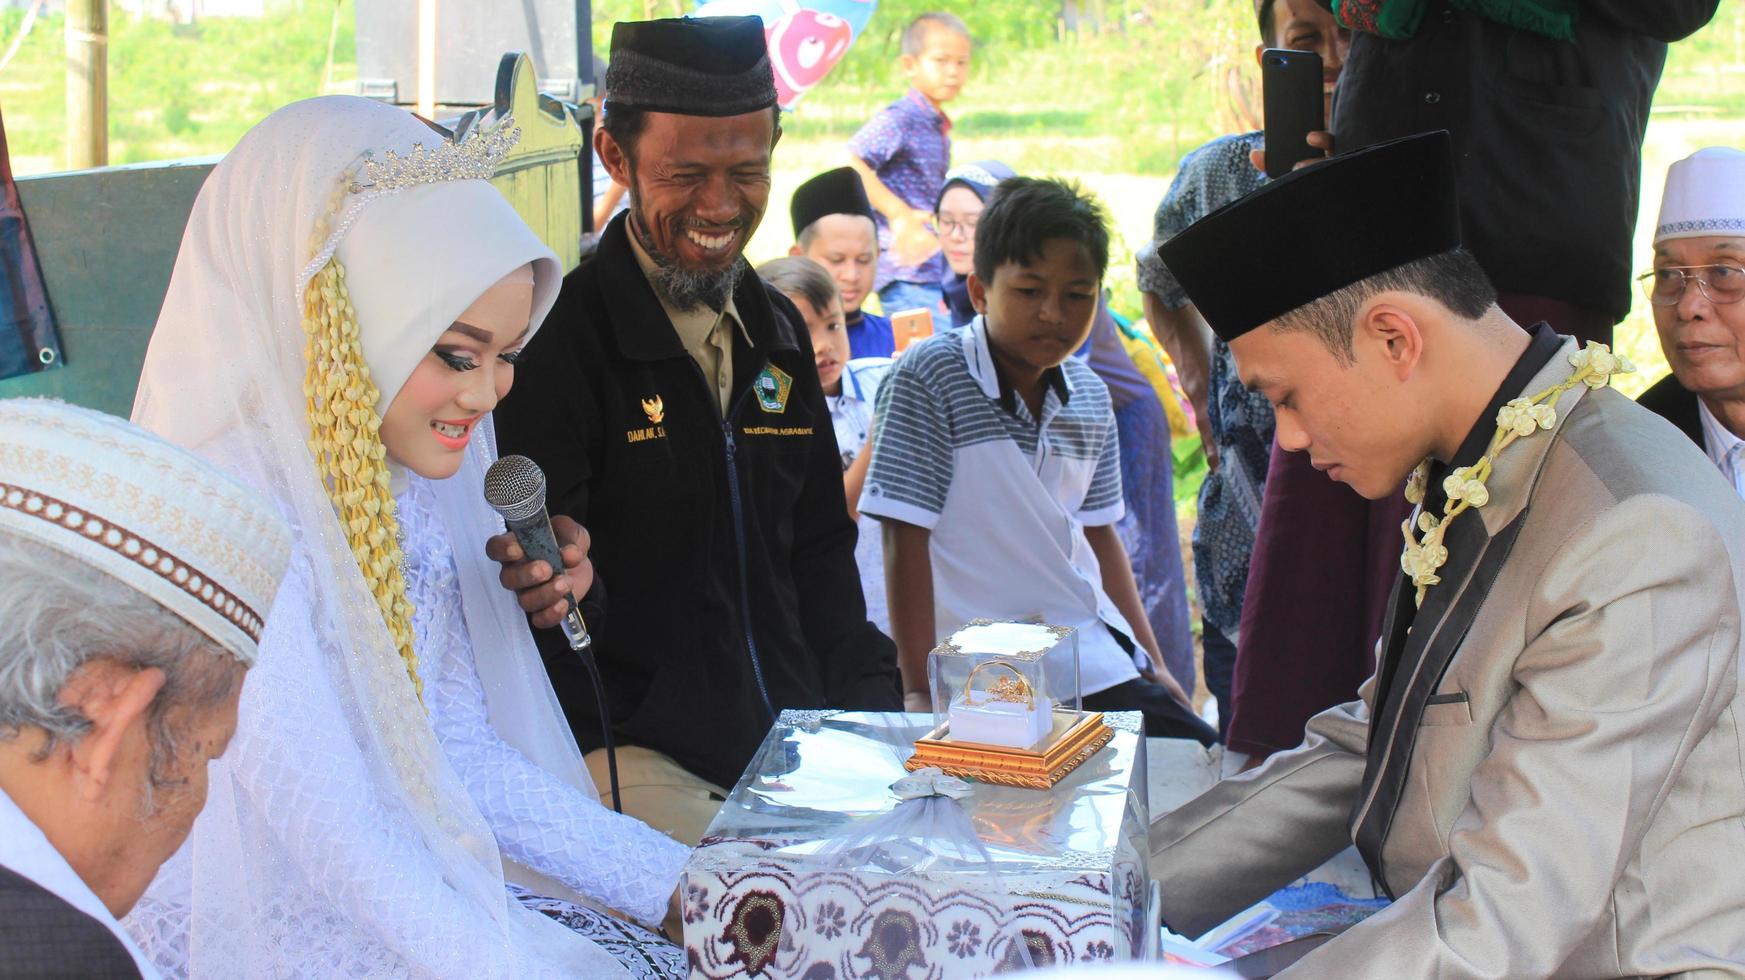 Cianjur Regency, West Java, Indonesia on June 12, 2021, Delivery of the dowry from the groom to the bride. Islamic wedding culture in Indonesia. photo